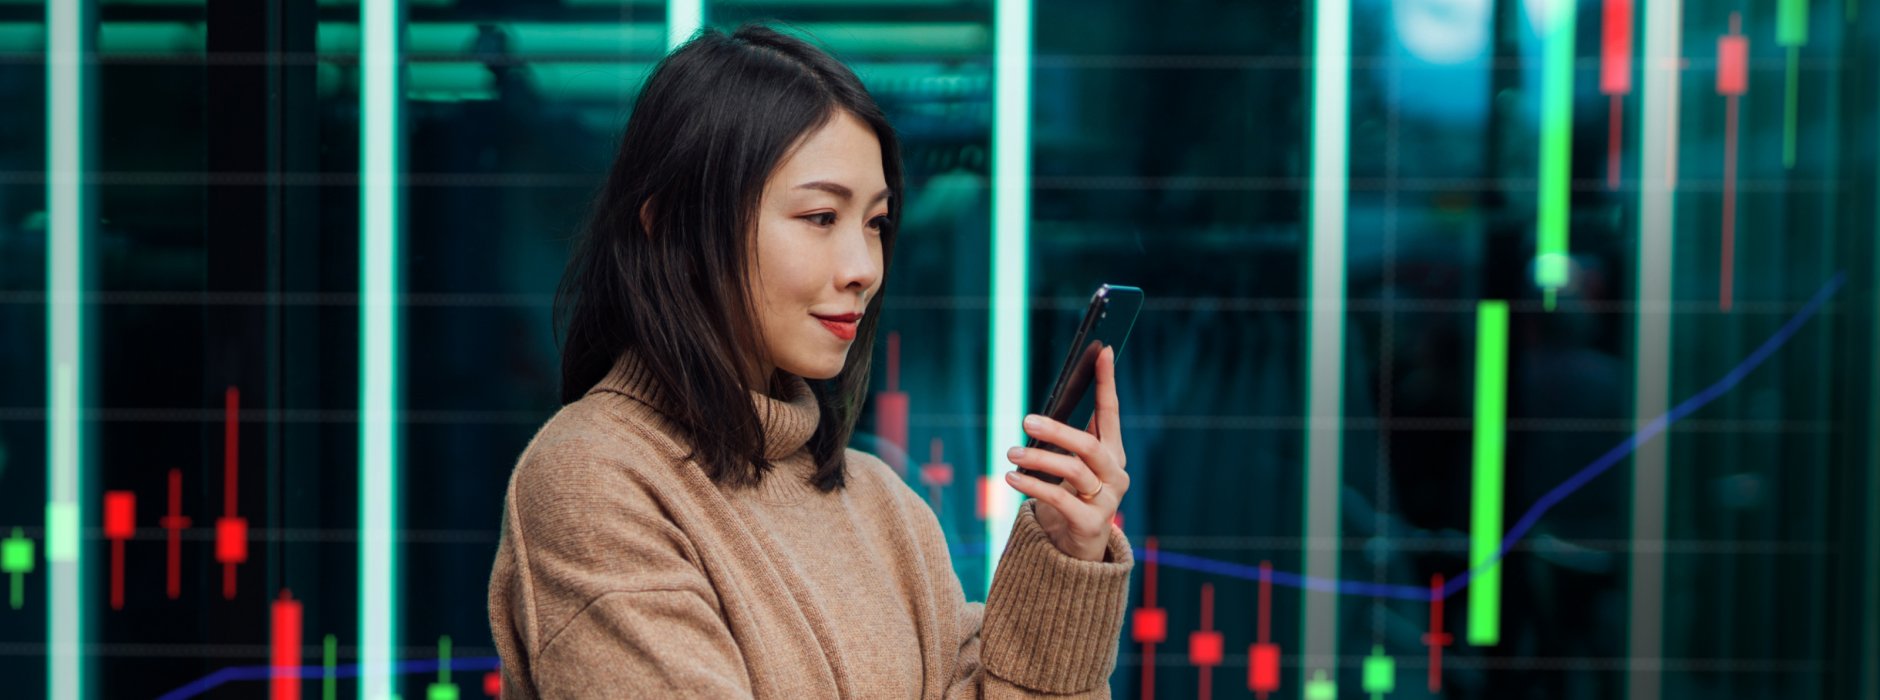 Asian woman looking at her phone standing in front of a background showing a trading chart